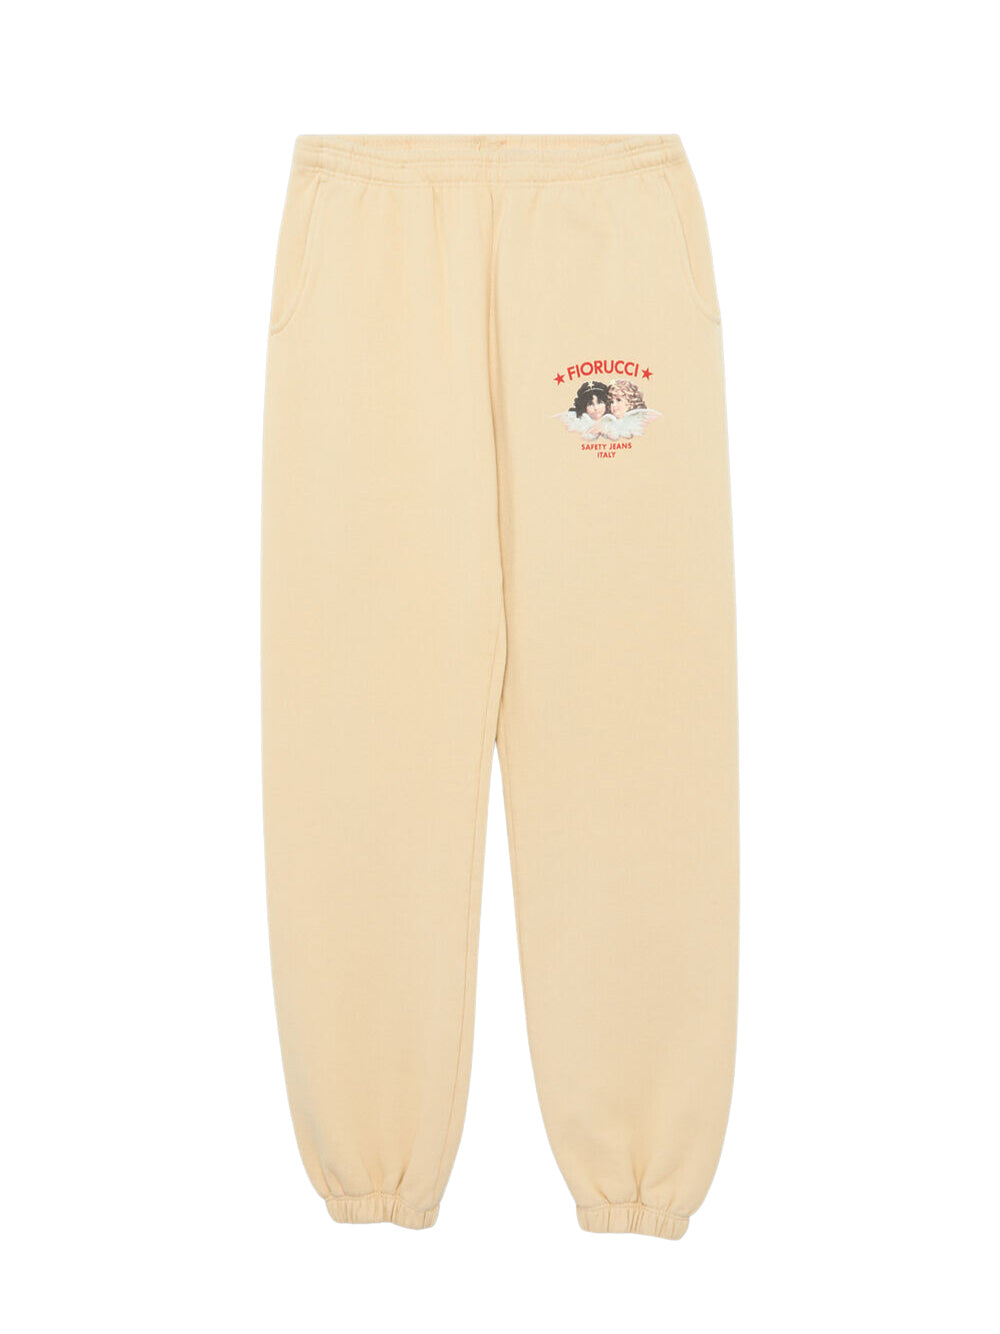 Safety Angels Joggers (Beige)